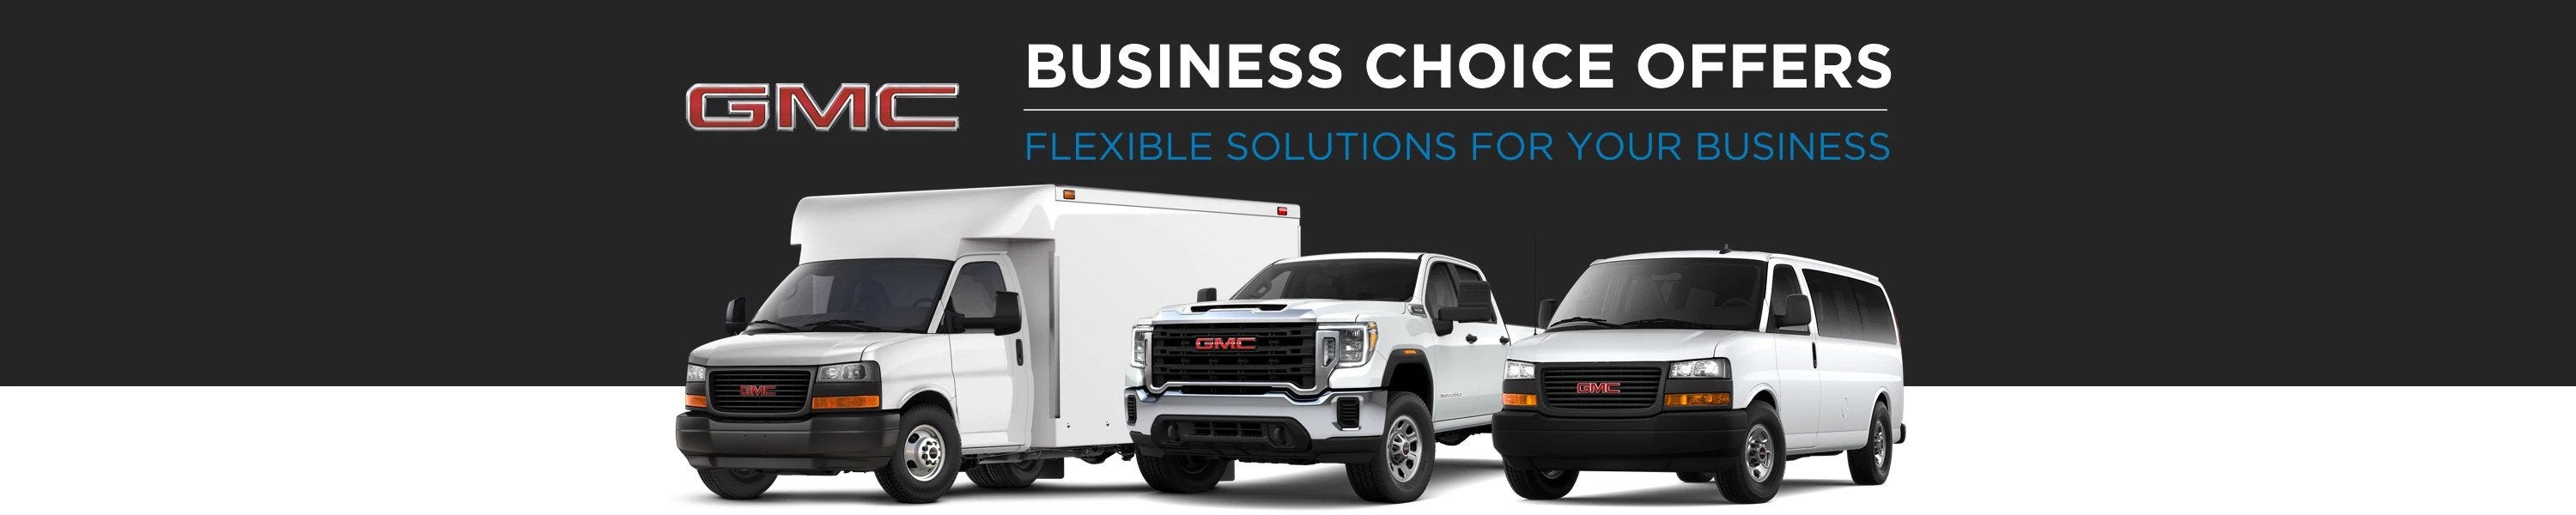 GMC Business Choice Offers - Flexible Solutions for your Business - Crain Buick GMC of Springdale in Springdale AR